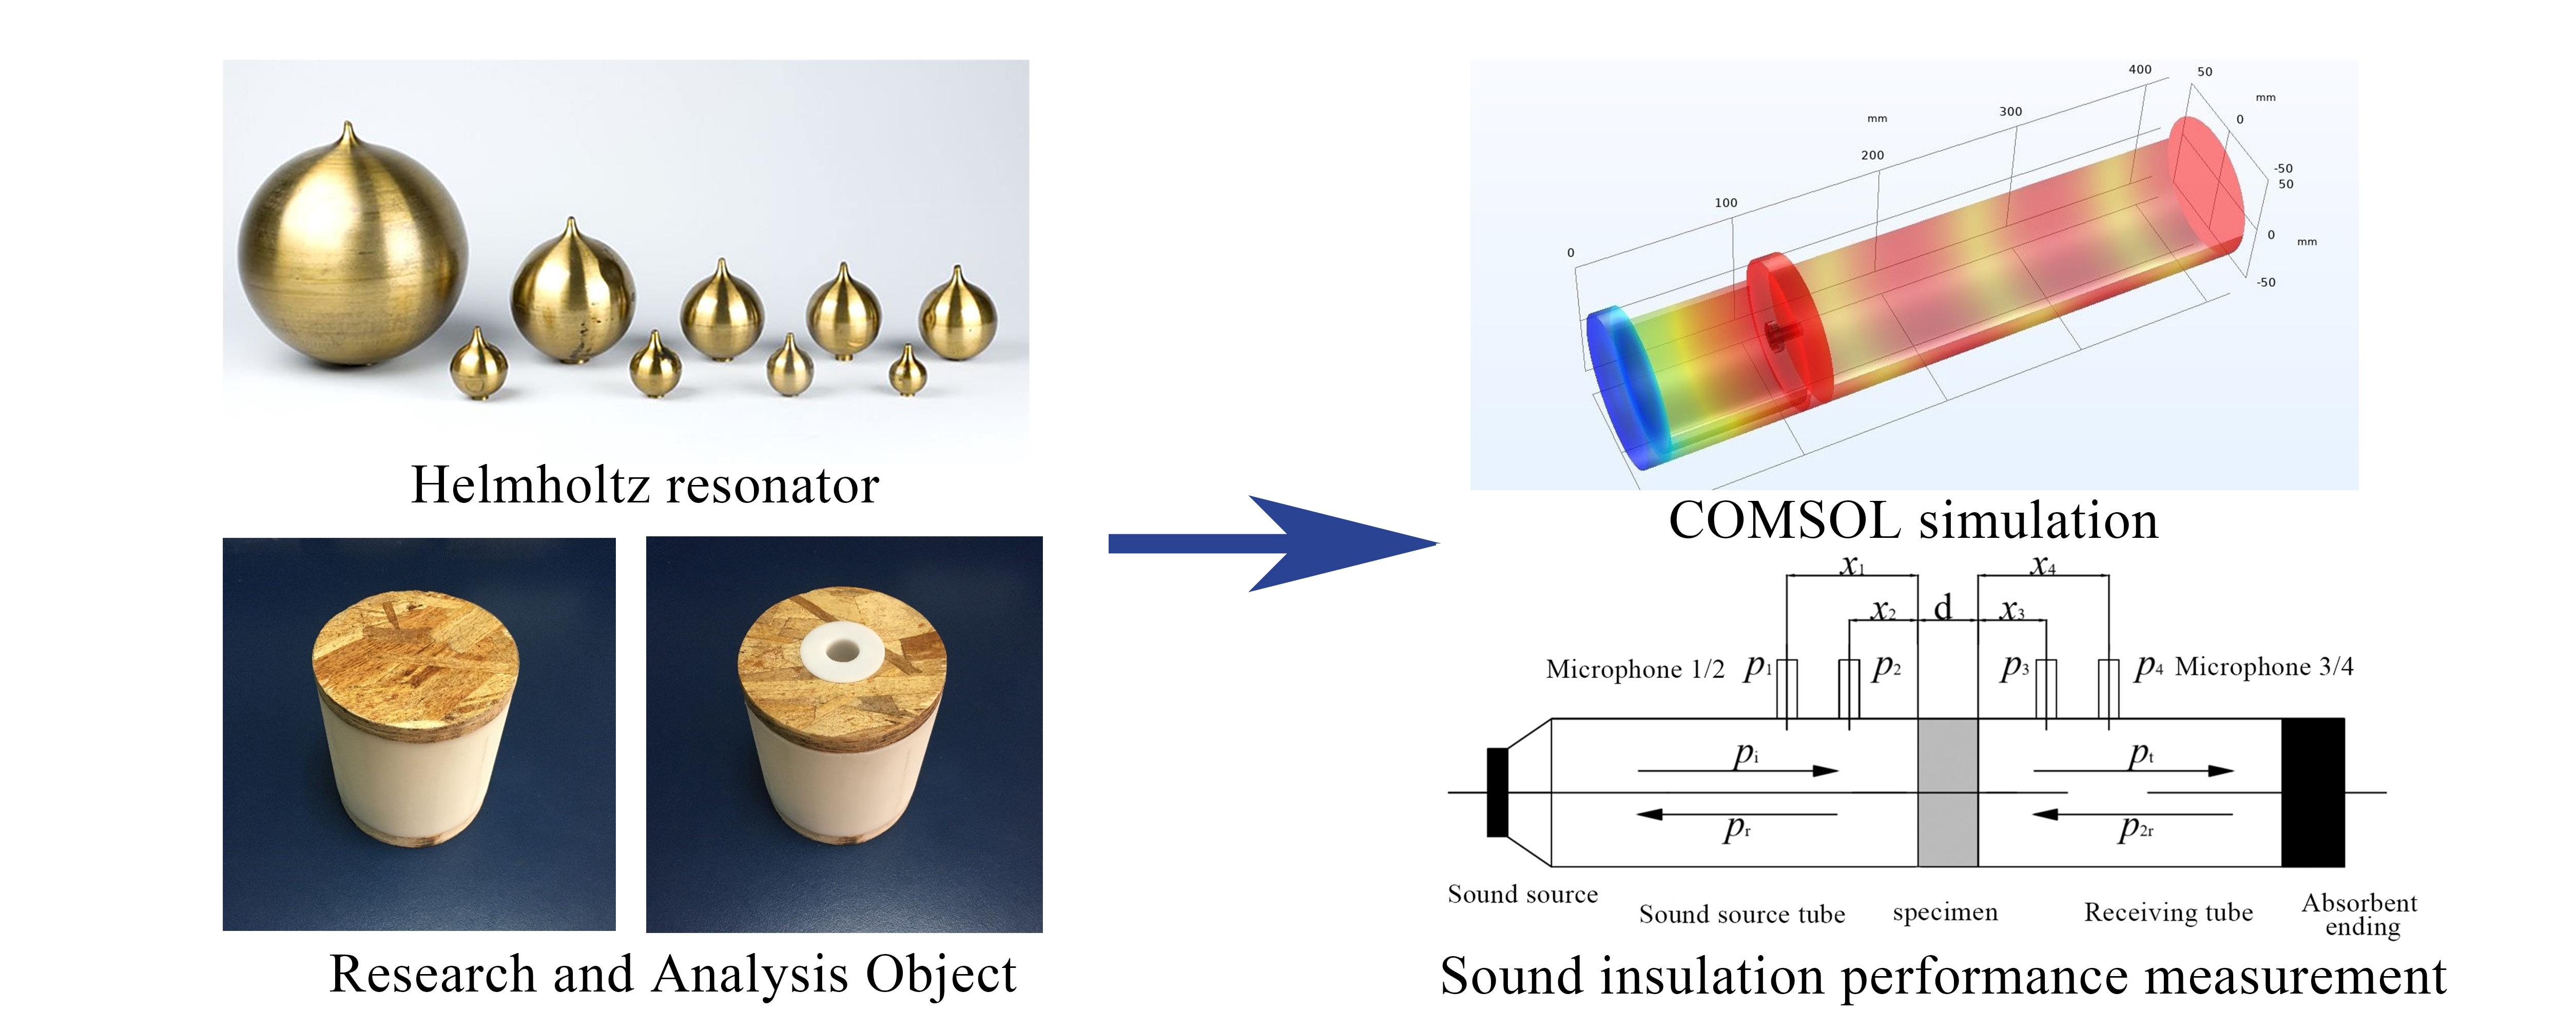 Acoustics Performance Research and Analysis of Light Timber Construction Wall Elements Based on Helmholtz Metasurface